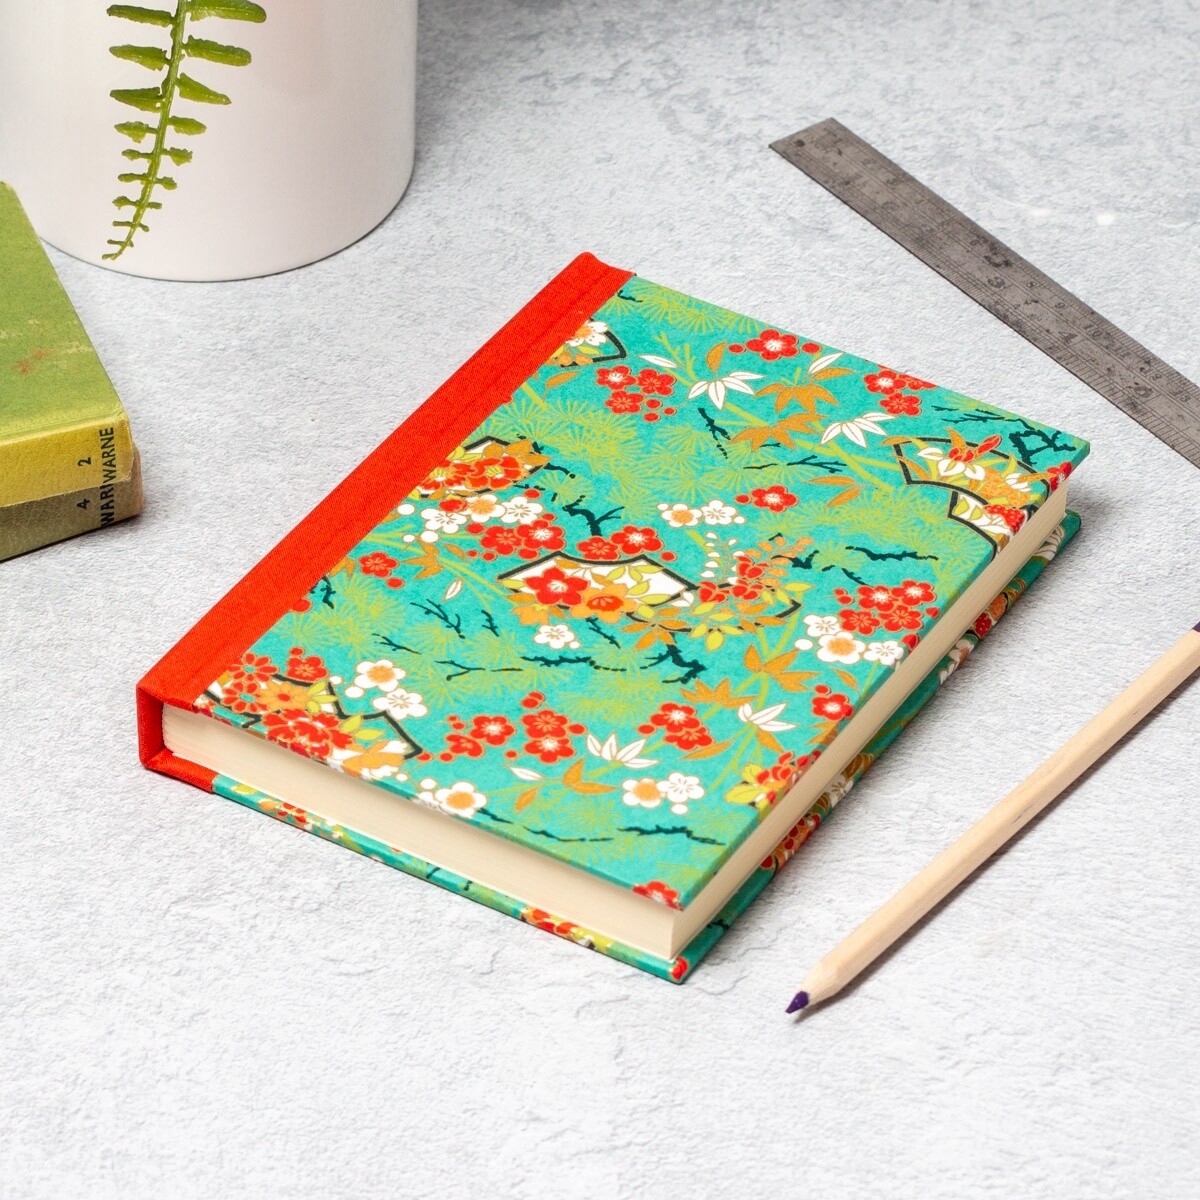 Classic Journal - Small - Orange Blossom/Teal by Esmie